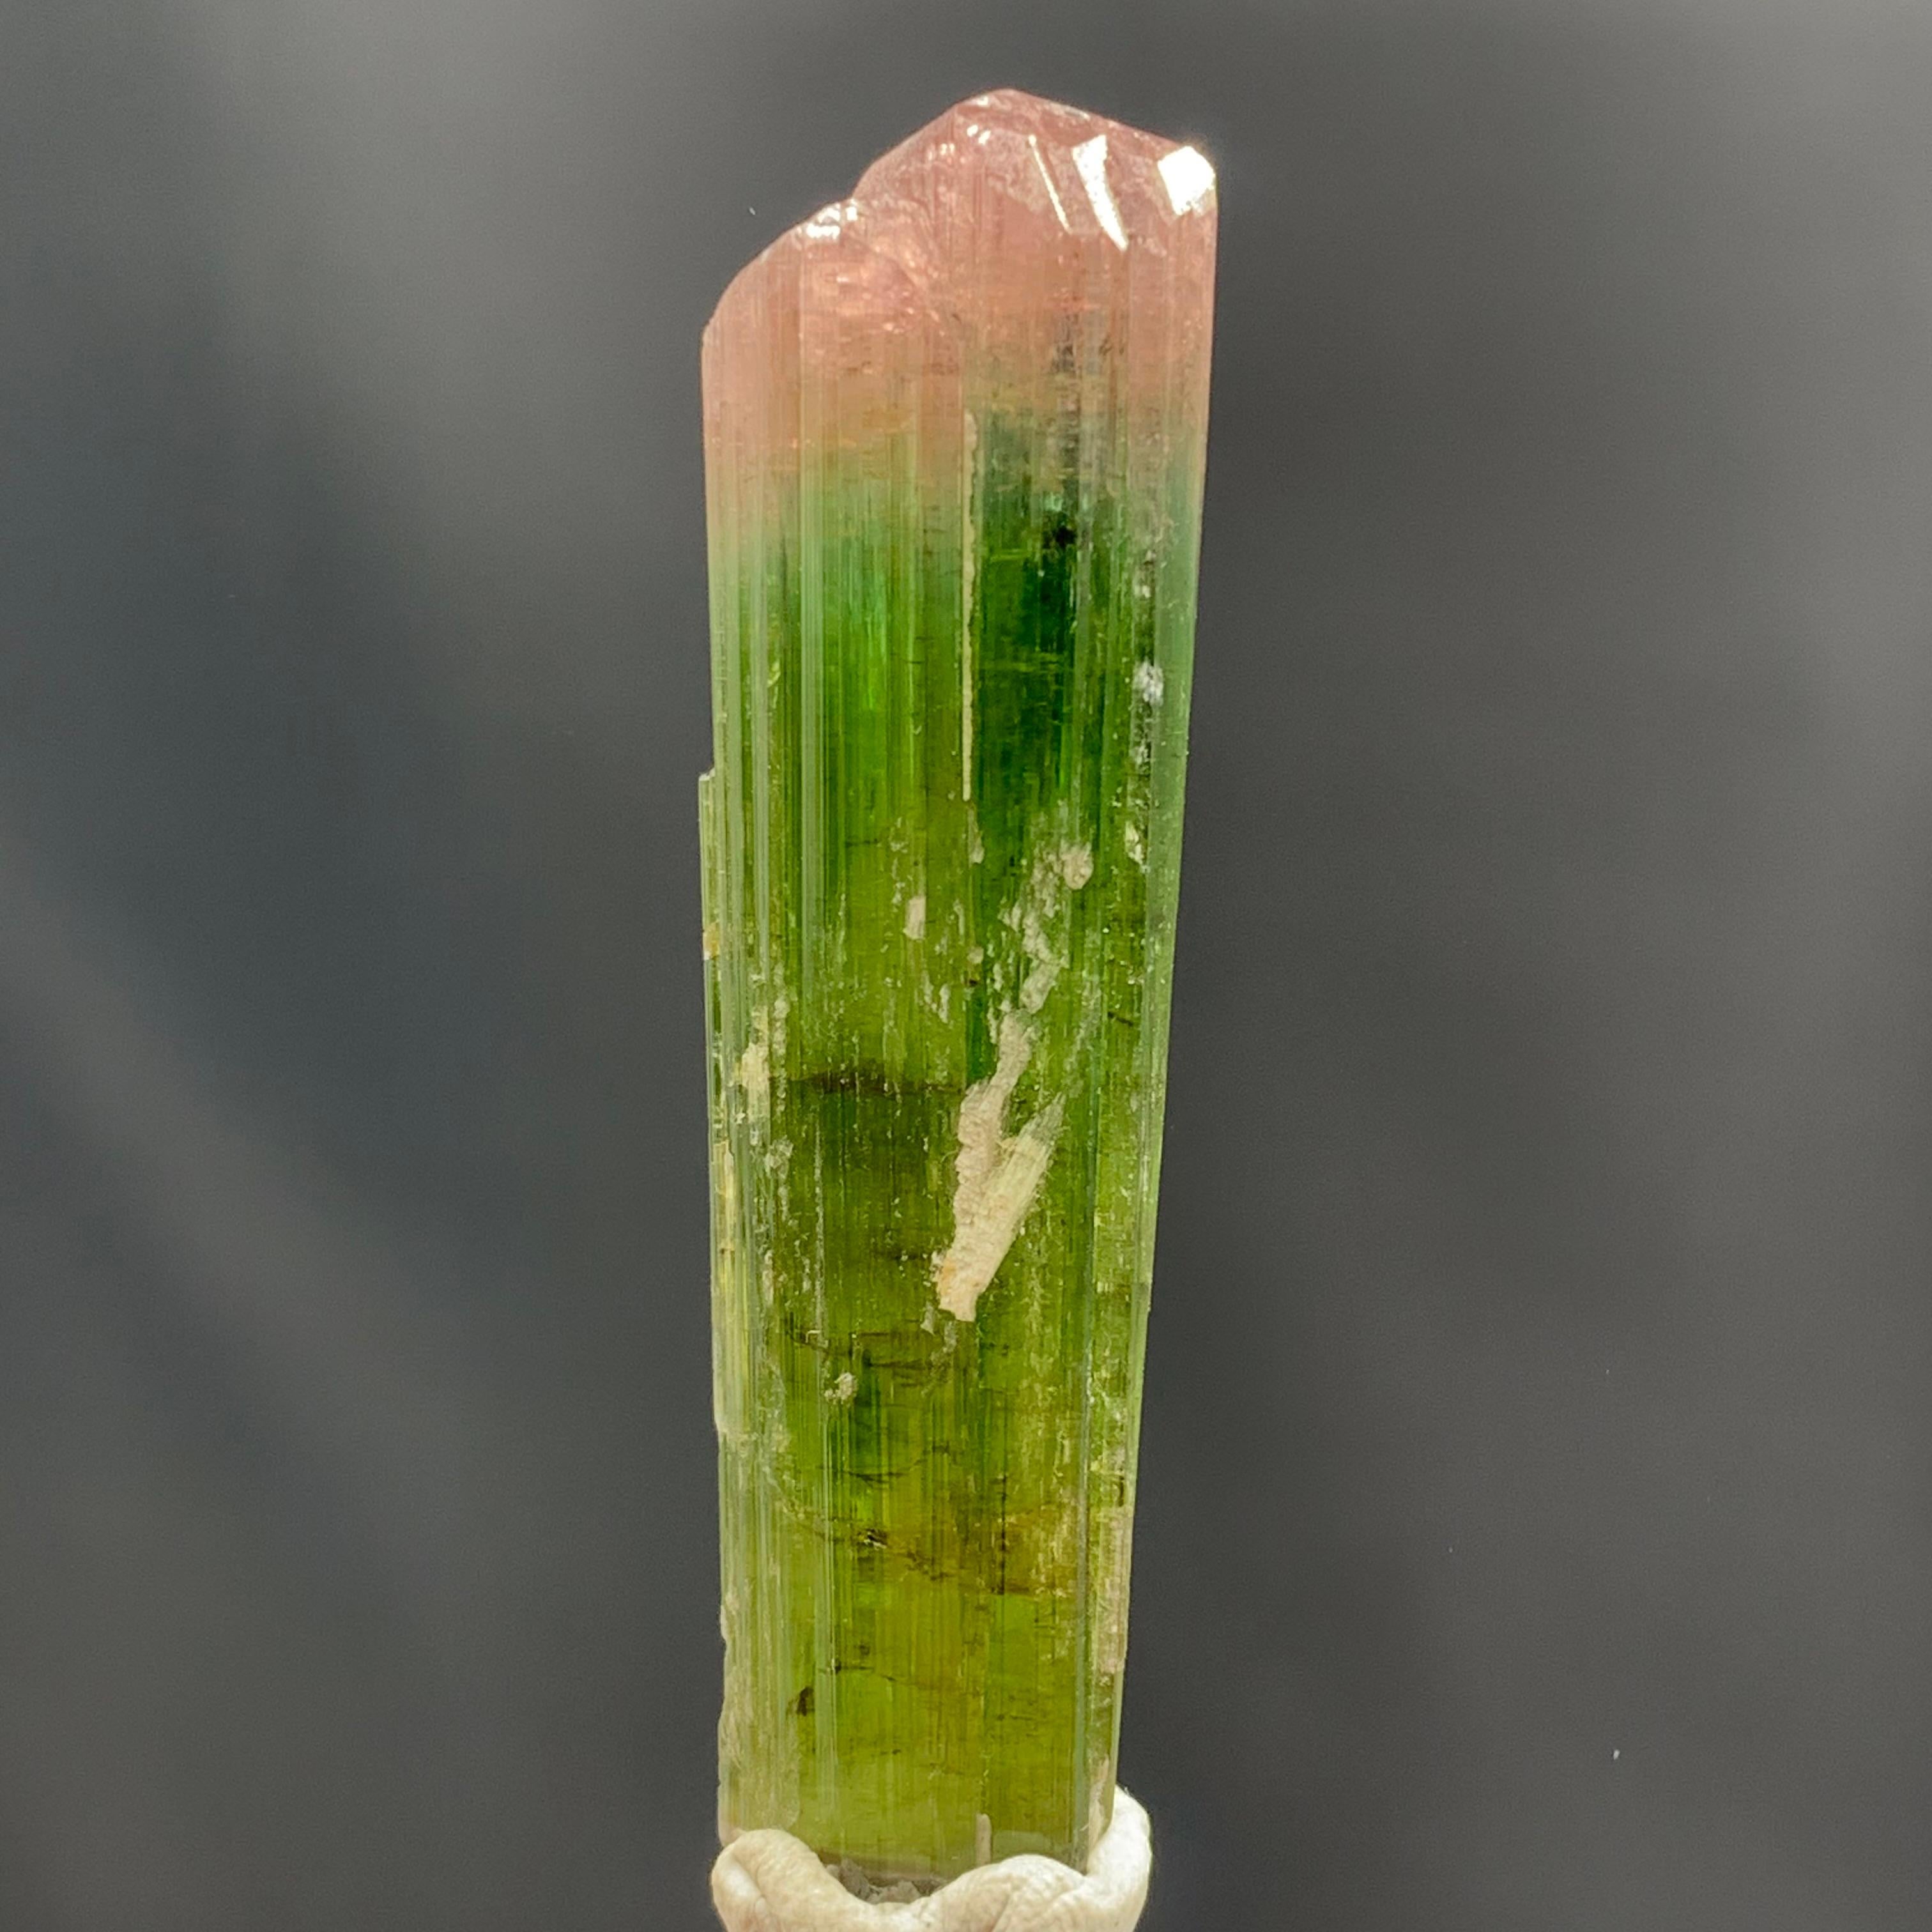 Glamorous Natural 69.75 Carat Bi Color Tourmaline Crystal From Afghanistan For Sale 3